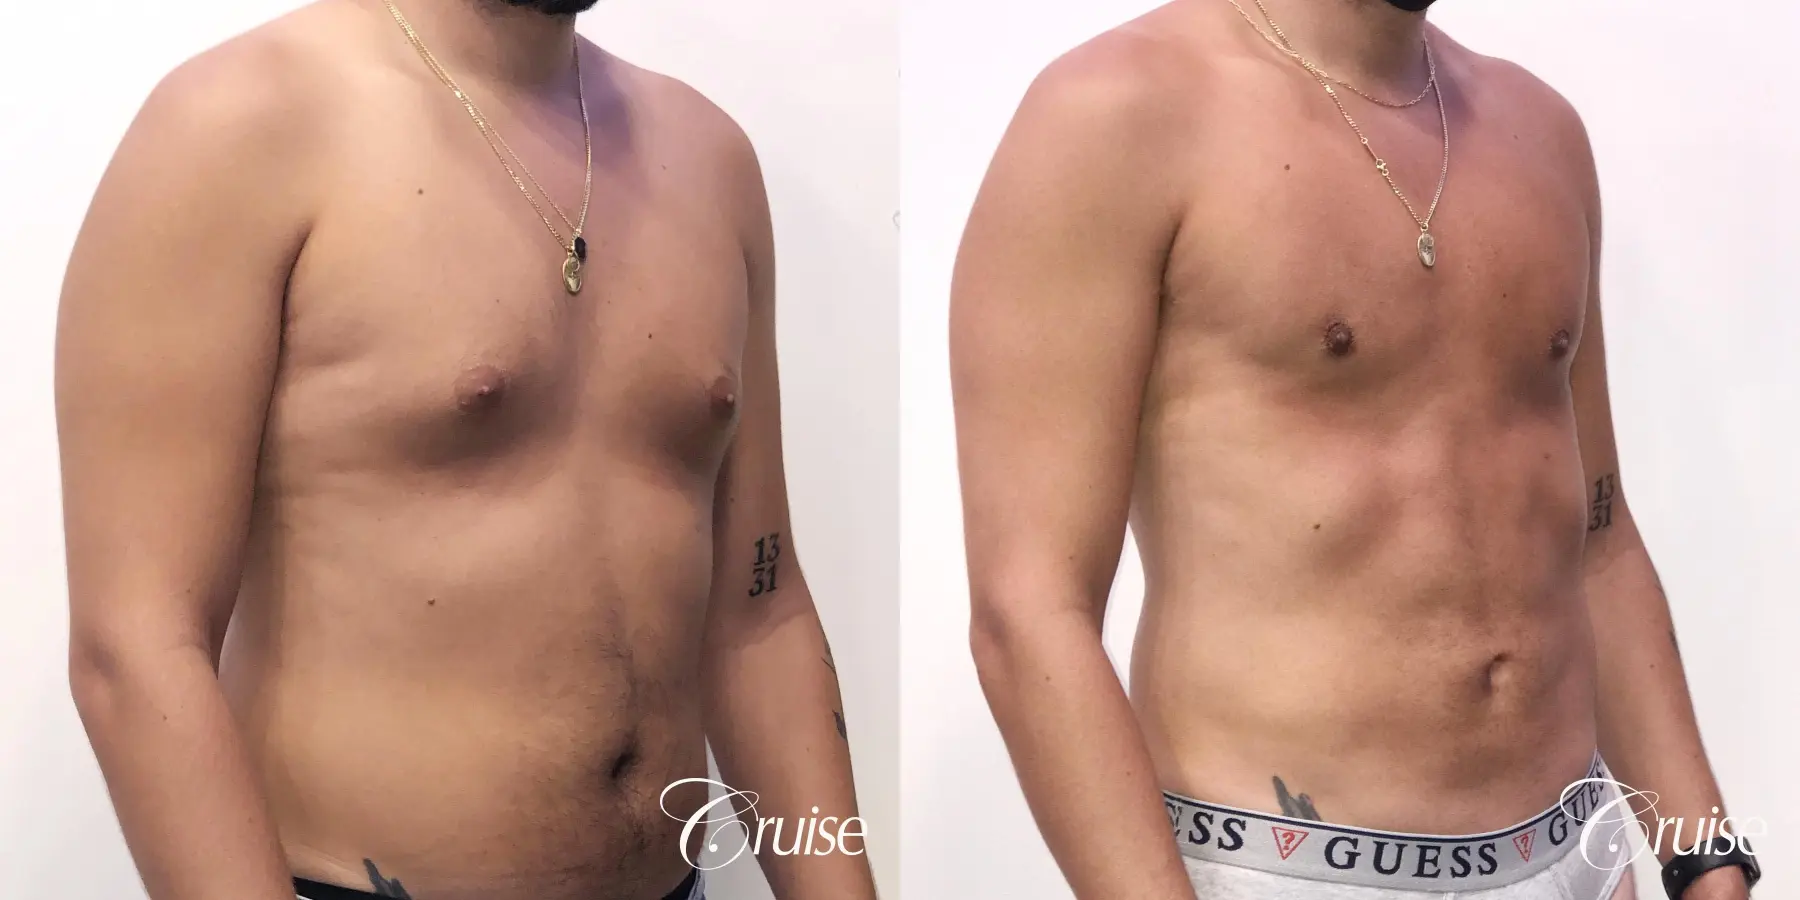 gynecomastia correction orange county - Before and After 5